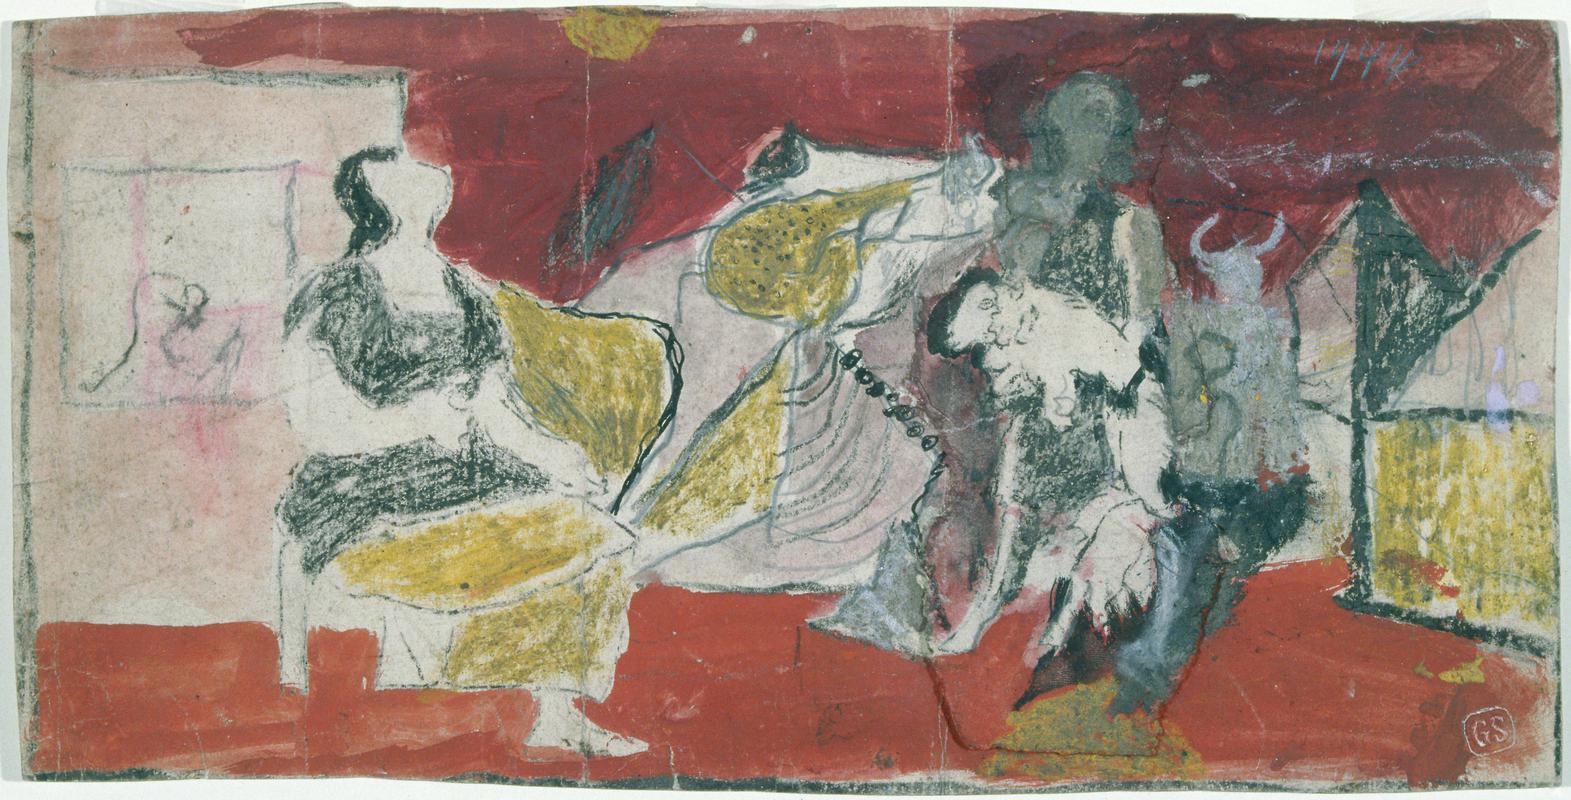 Women with Sheep, a study